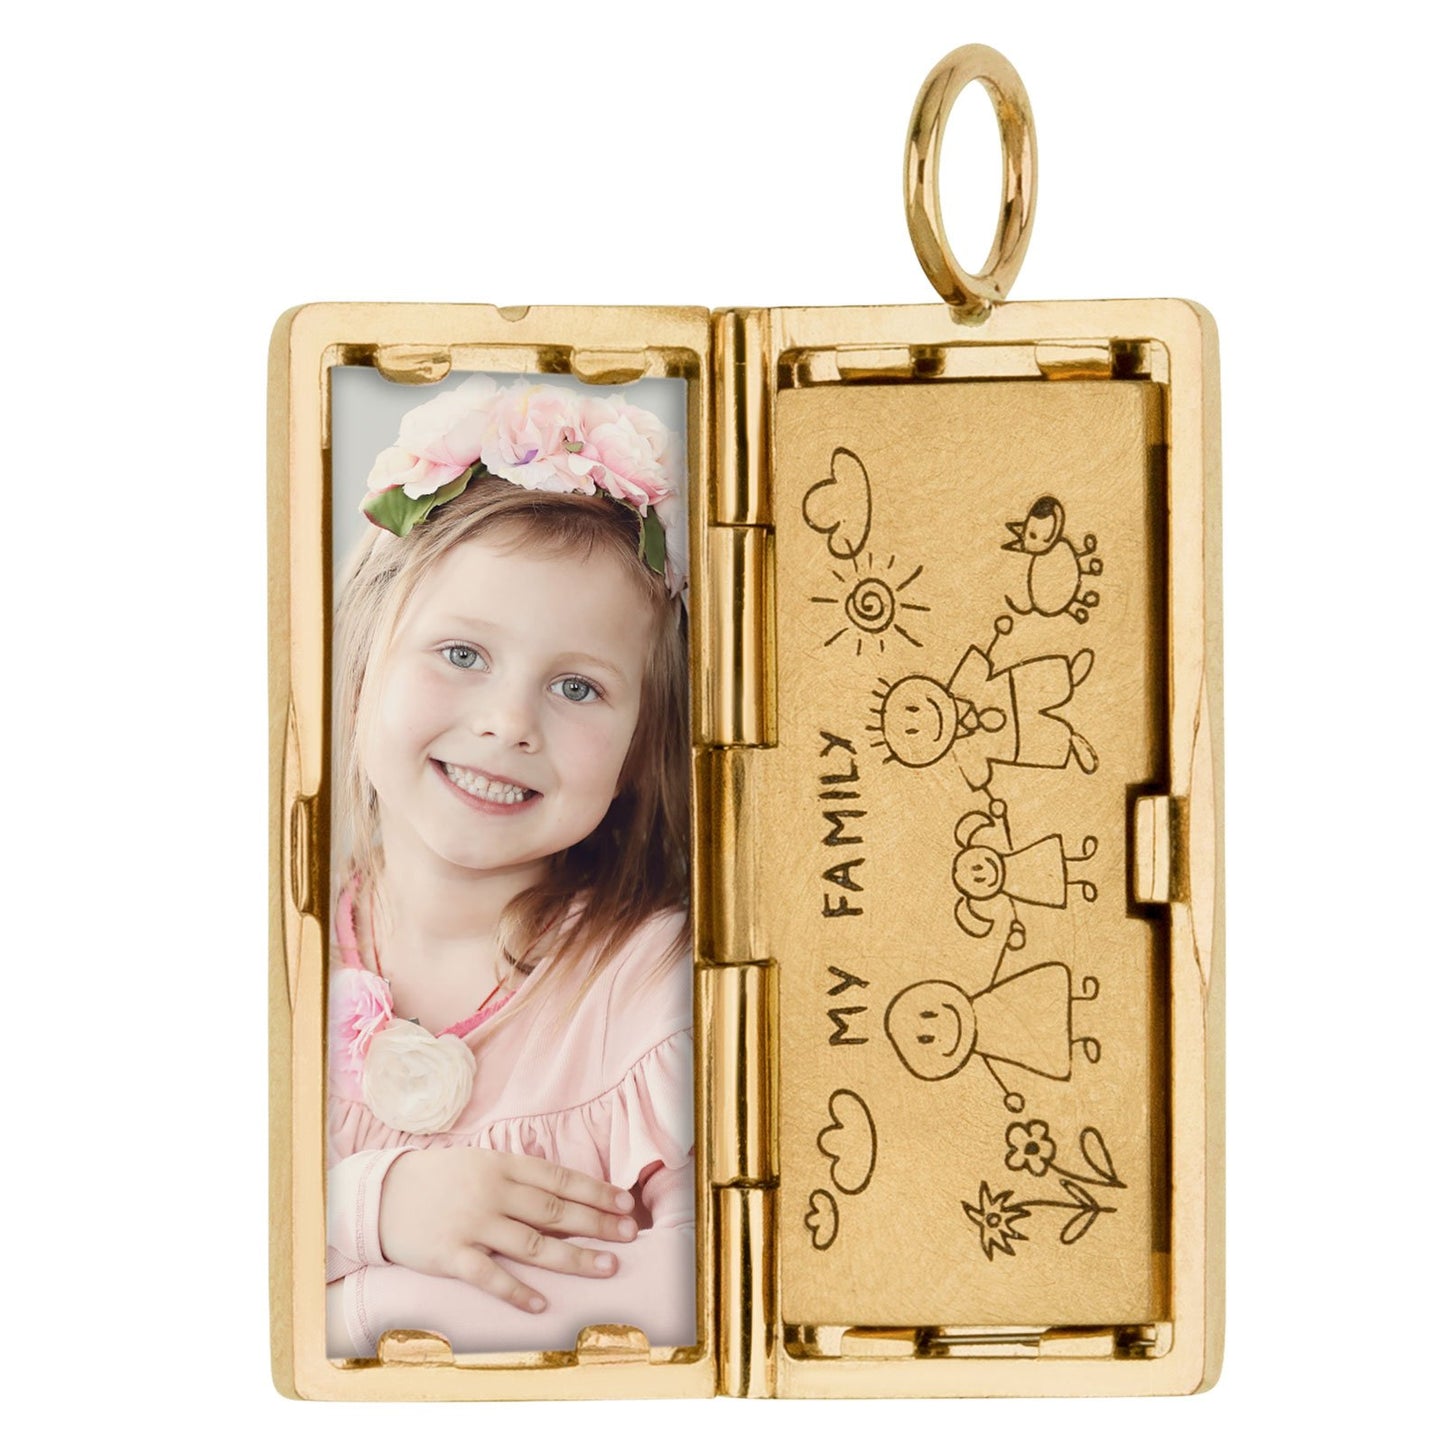 Gold Rectangular Locket with Diamonds + Personalized Page